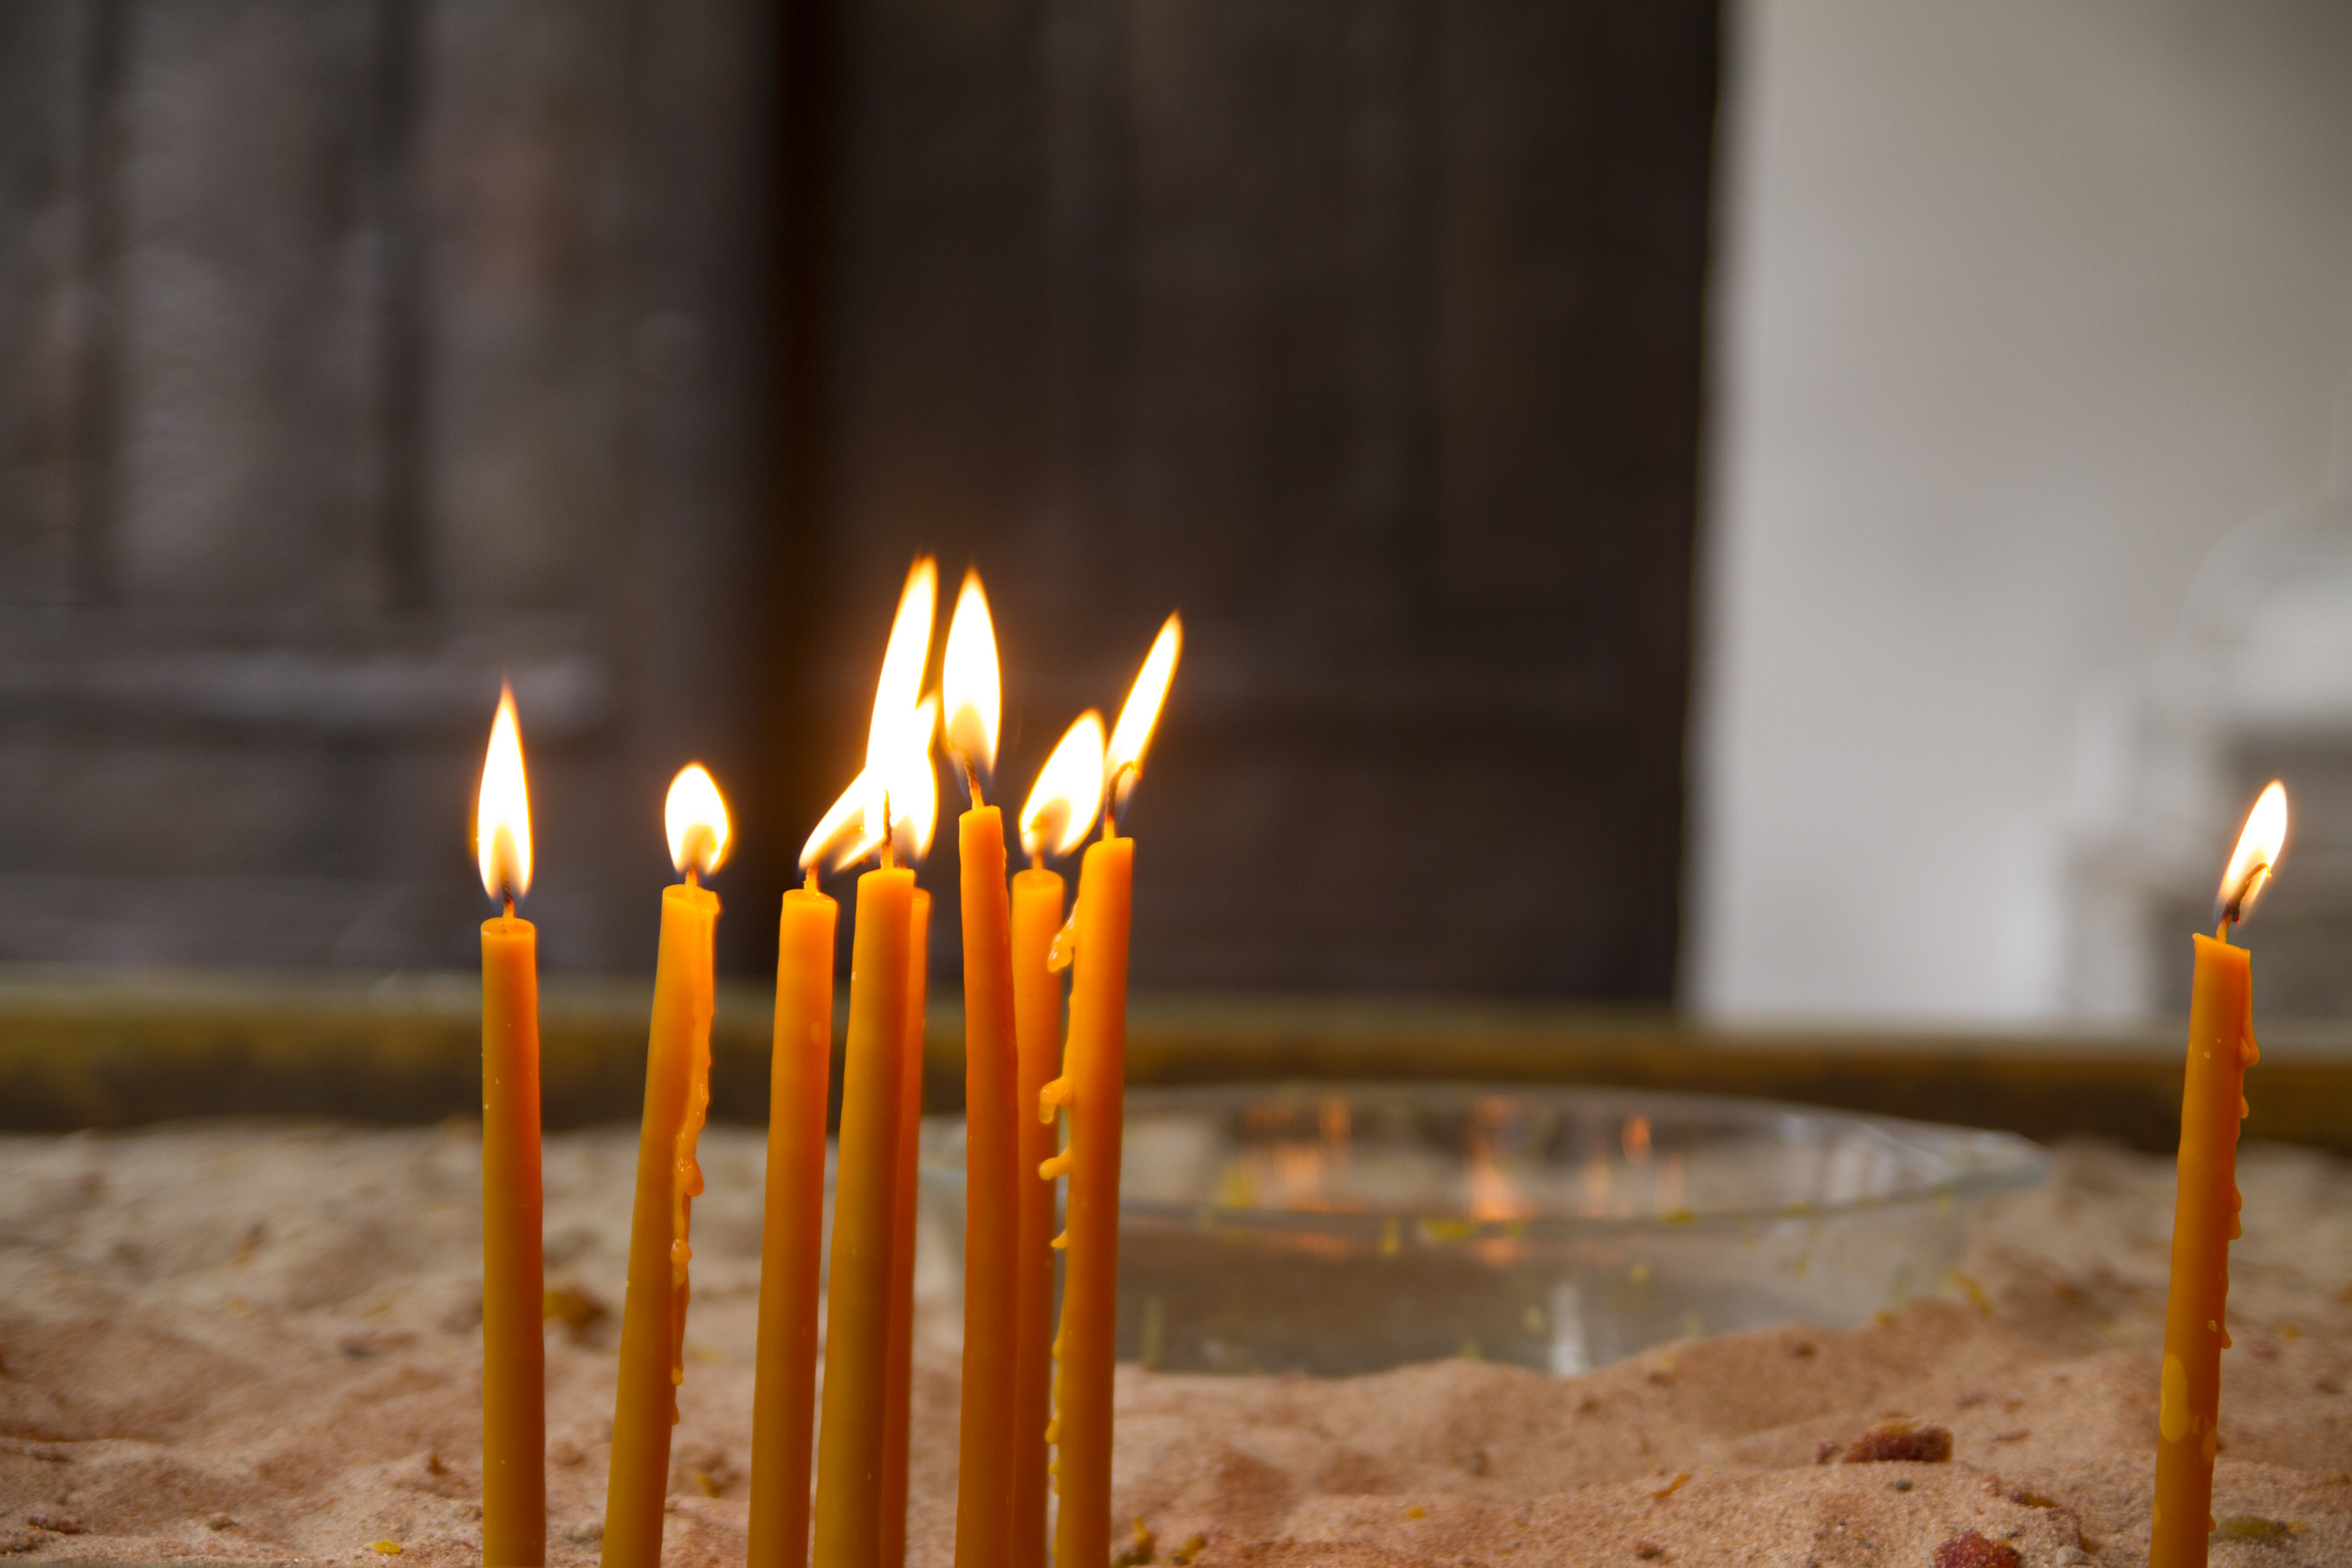 Few candles burning in the church.